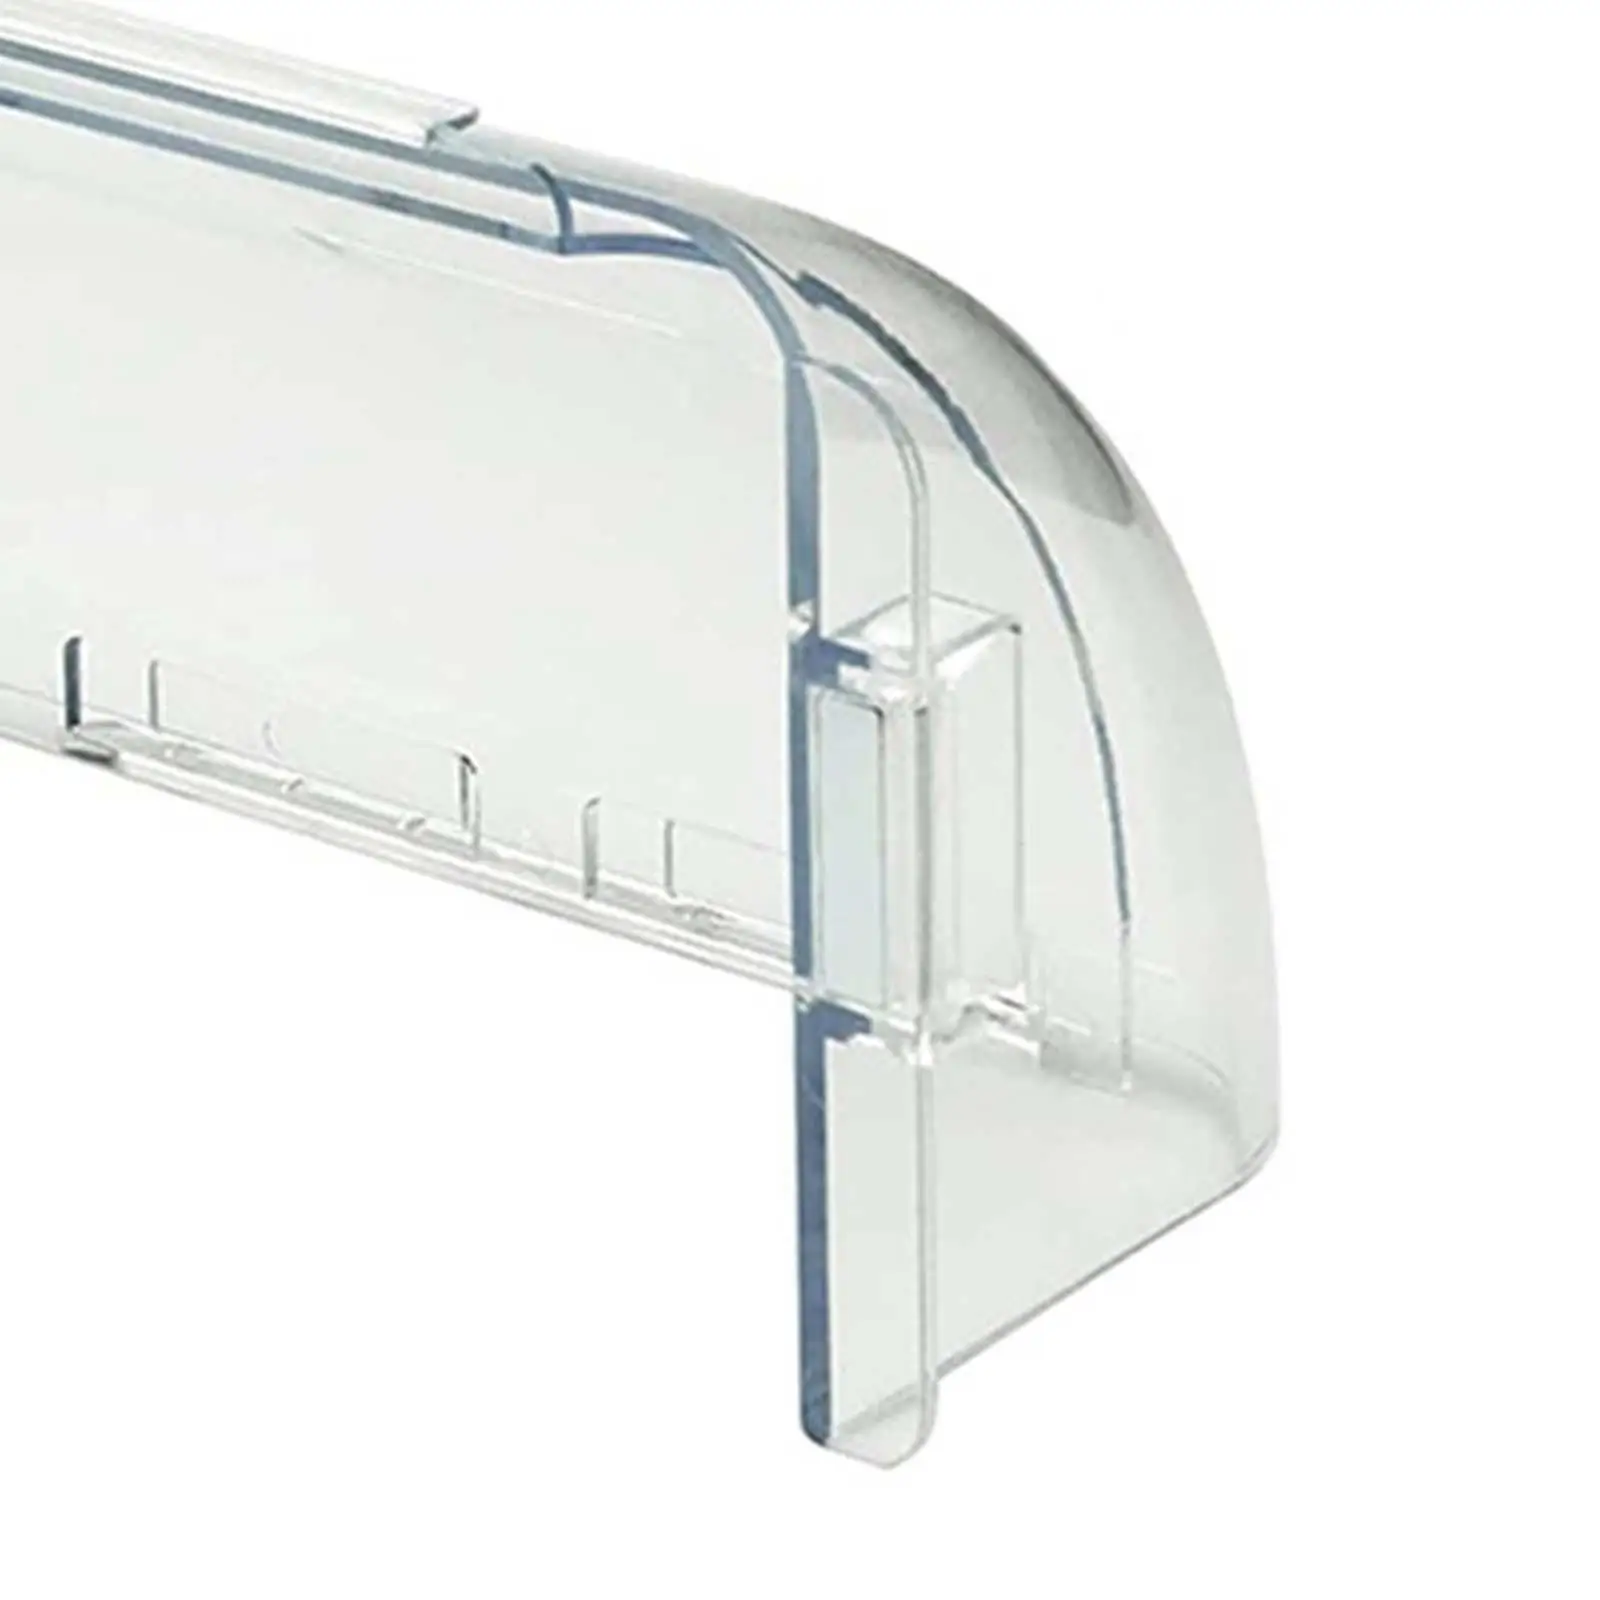 2x Transparent Deflector Adjustable Air Vent Deflector Between 9-14 Vent Covers for Air Conditioning Sidewall